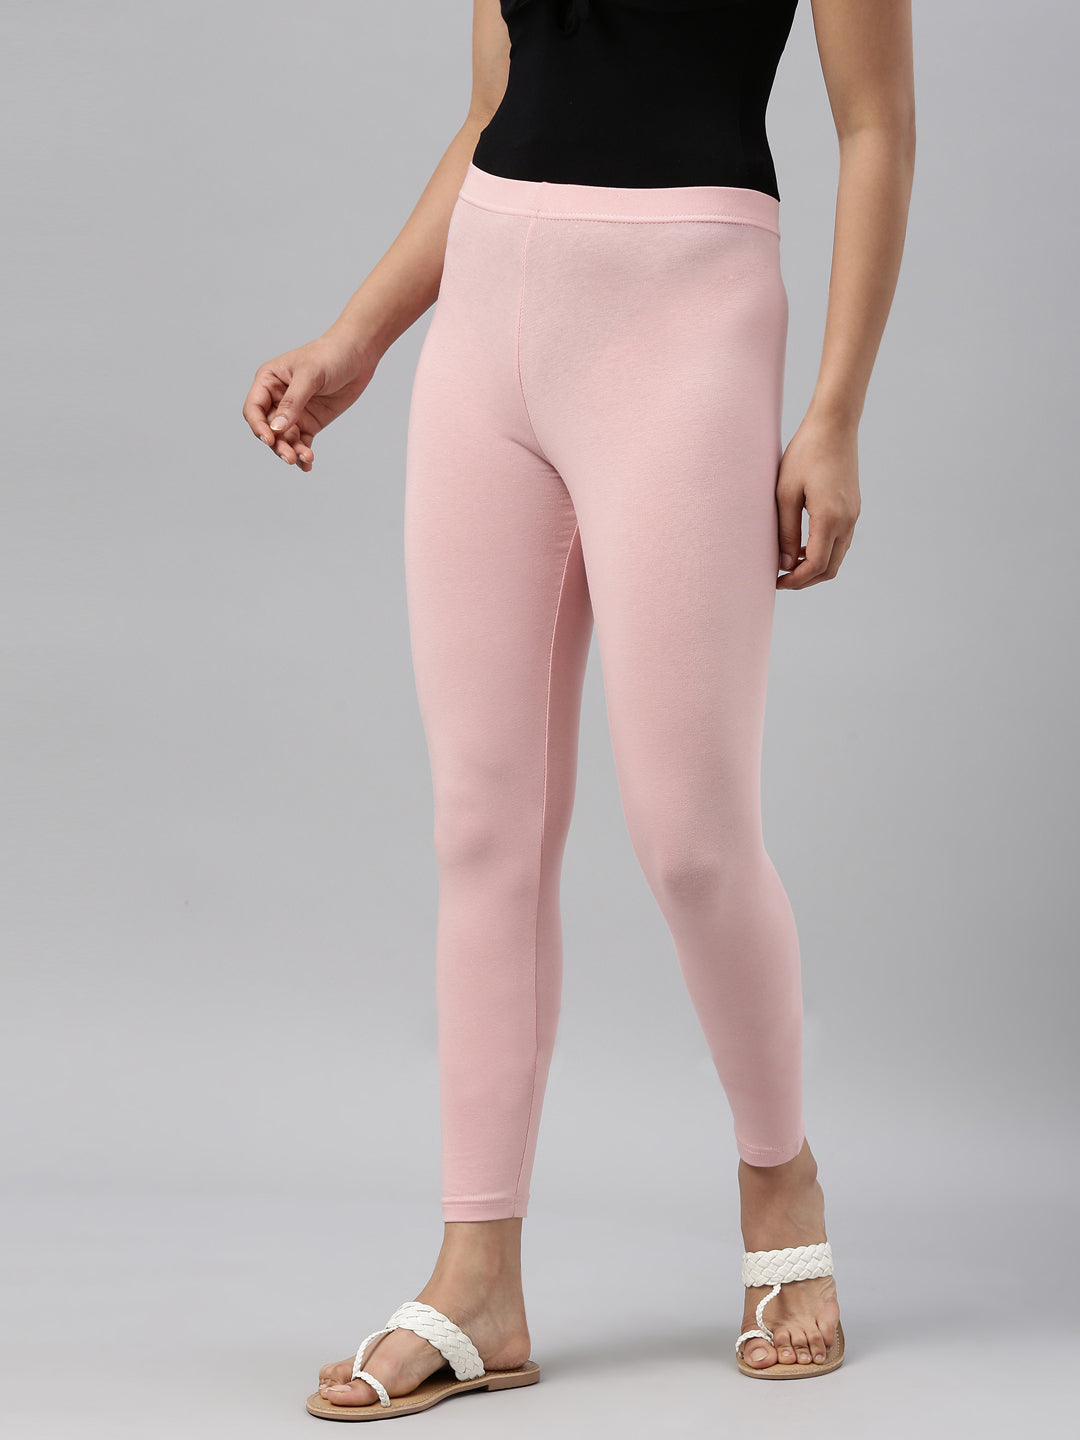 Dark pink women's slim fit cotton ankle length leggings legging for women  sizes: s small size for 24-28 inches